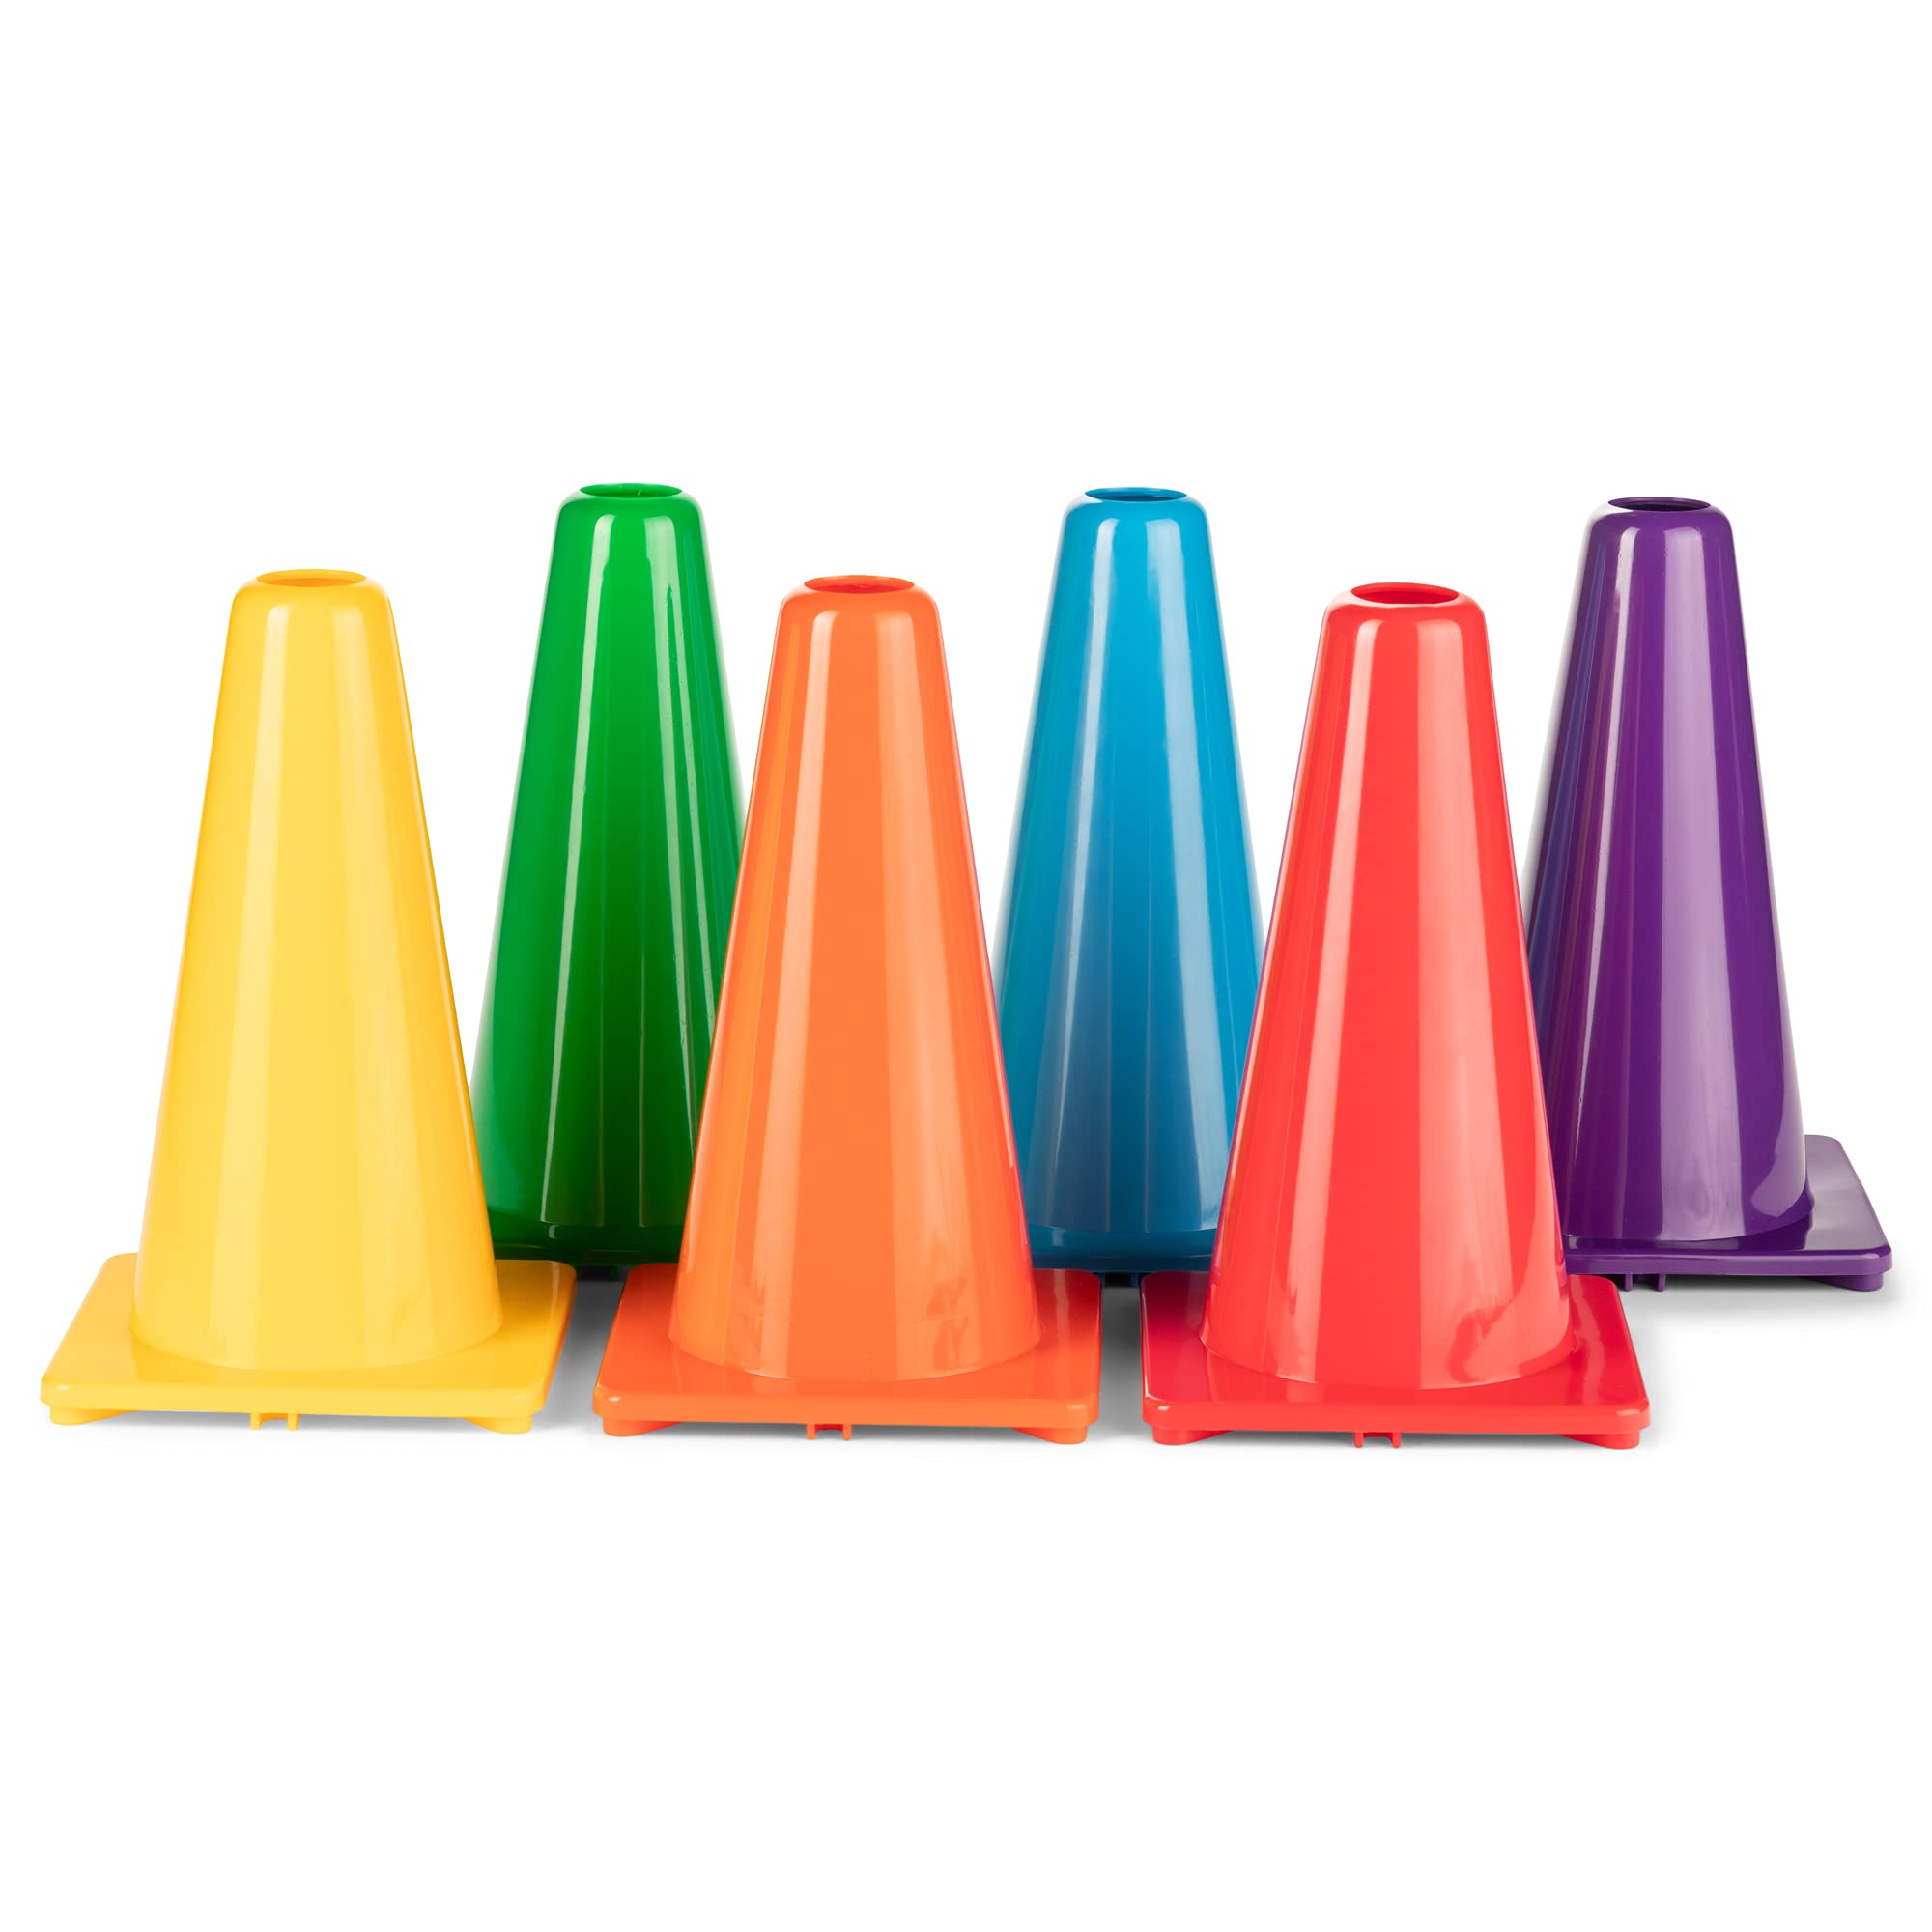 Champion Sports High Visibility Flexible Vinyl Cones - Single and Assorted Cone Sets in Multiple Heights and Colors